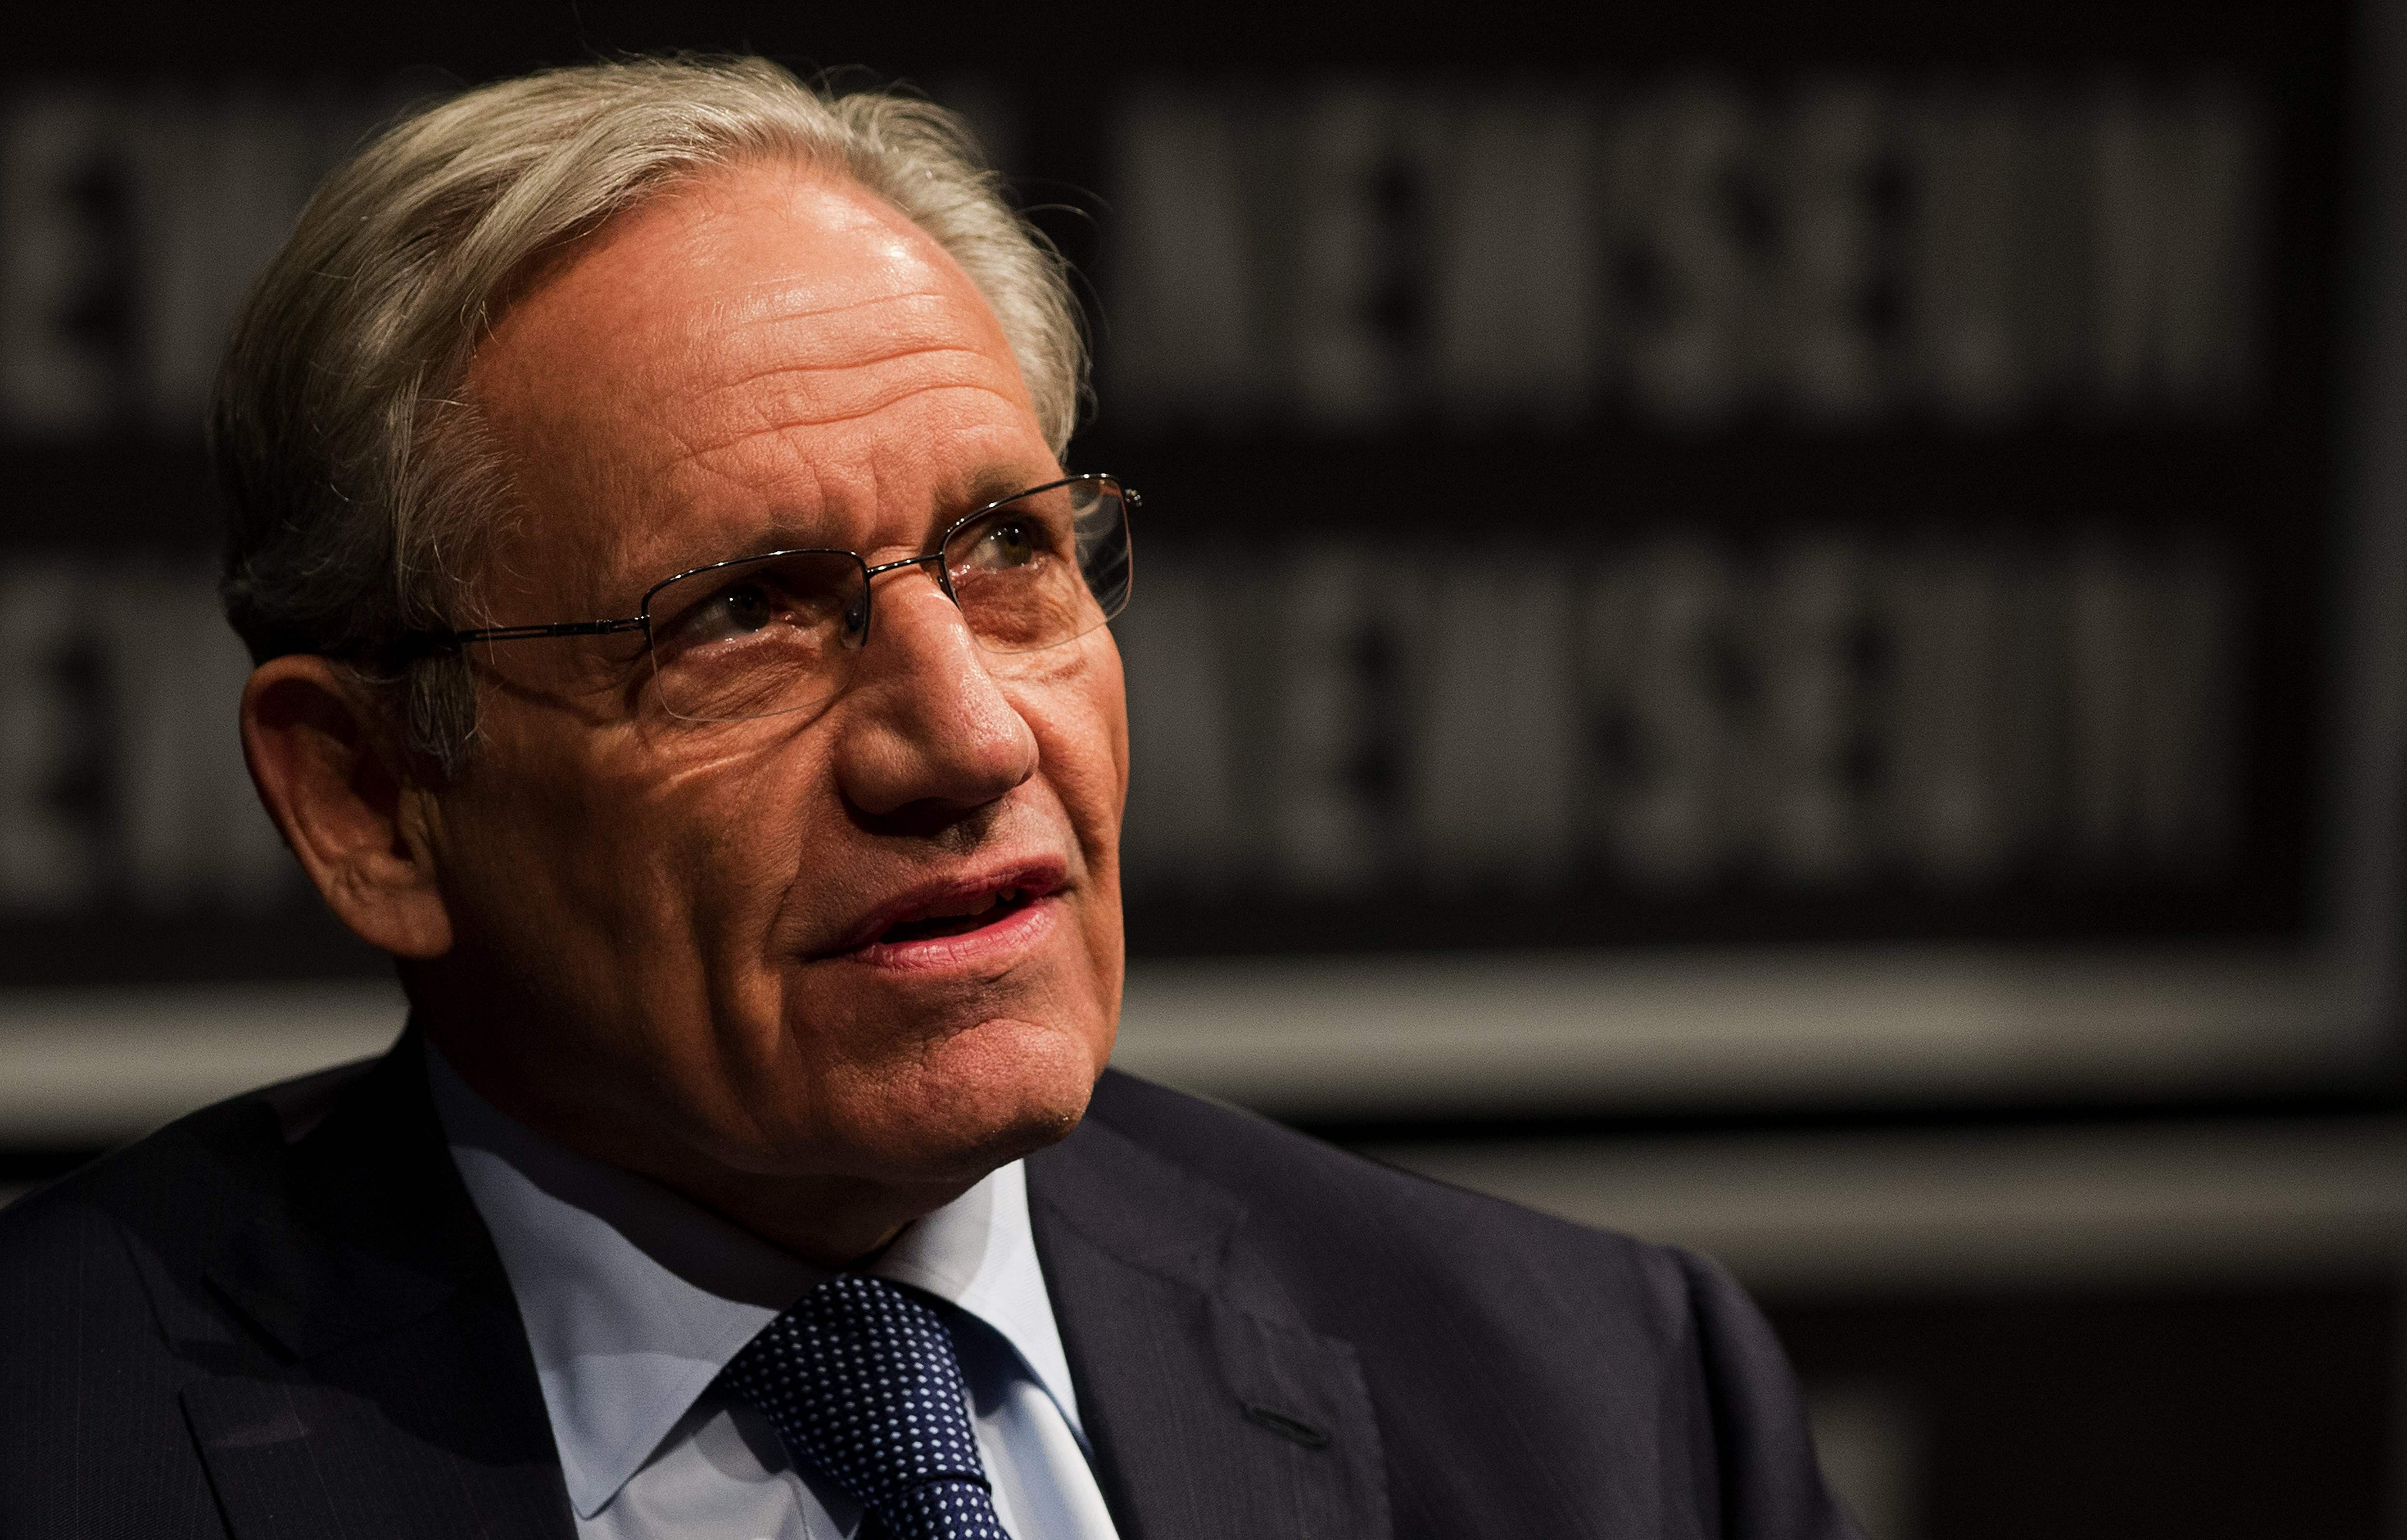 Excerpts from Bob Woodward's 'Rage' have shocked and infuriated Trump allies